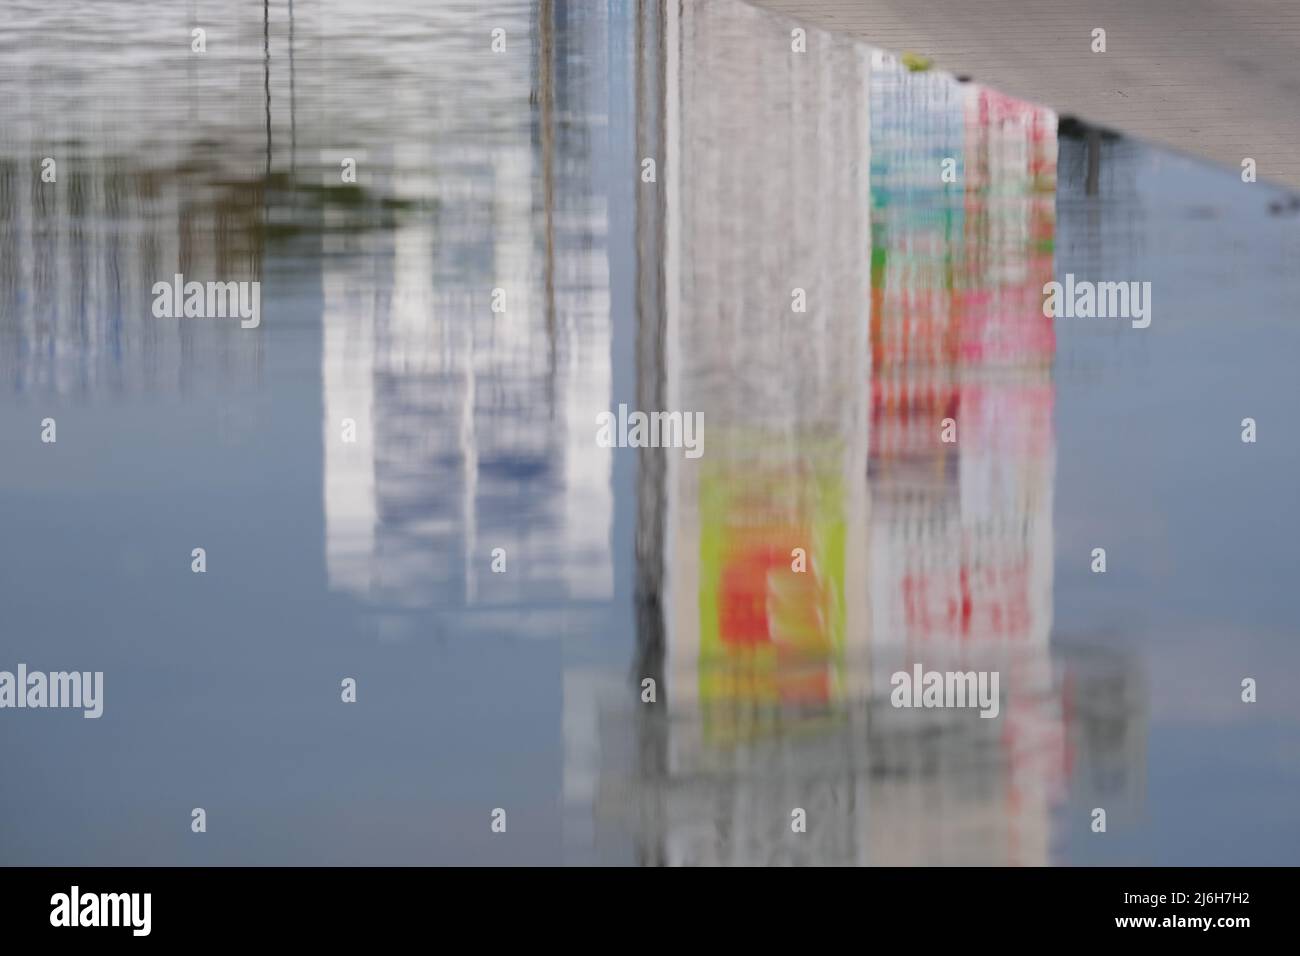 Blurred reflection of buildings in a pool on a city street Stock Photo